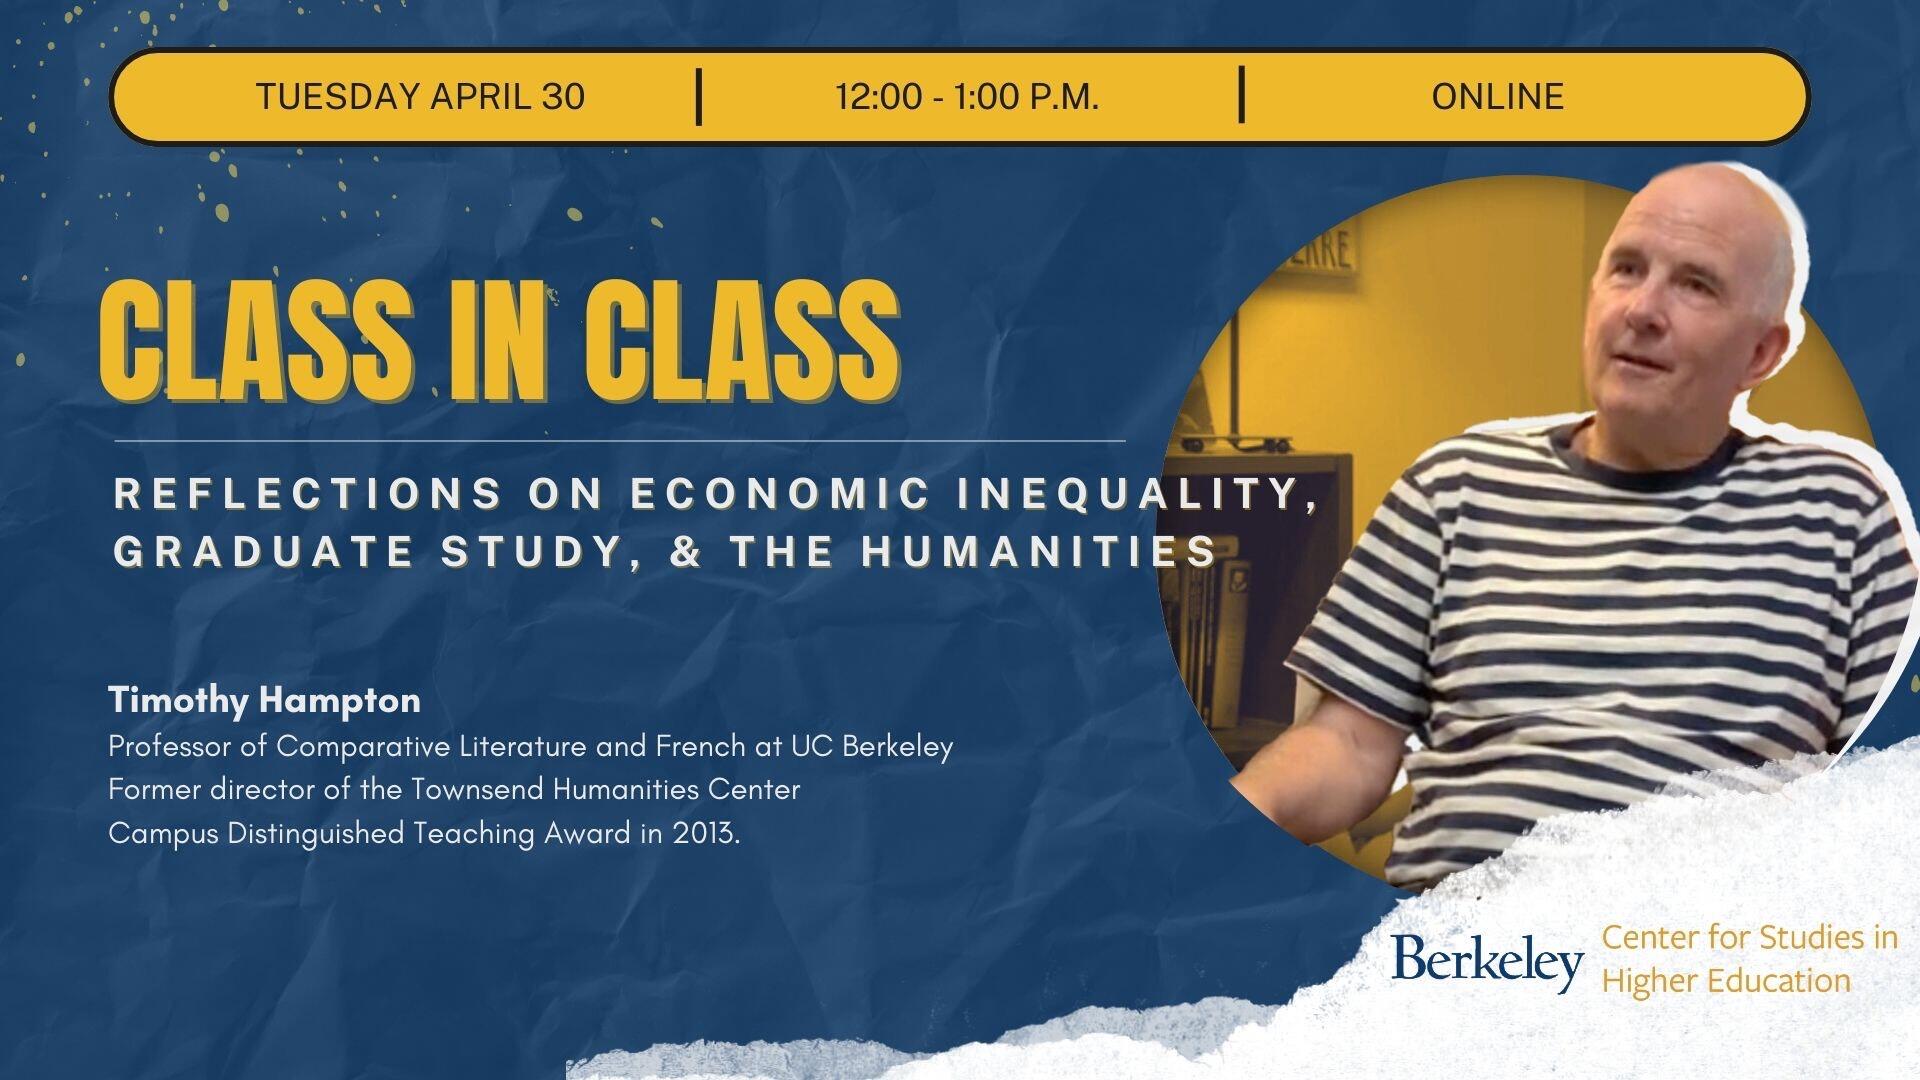  Reflections on Economic Inequality, Graduate Study and the Humanities